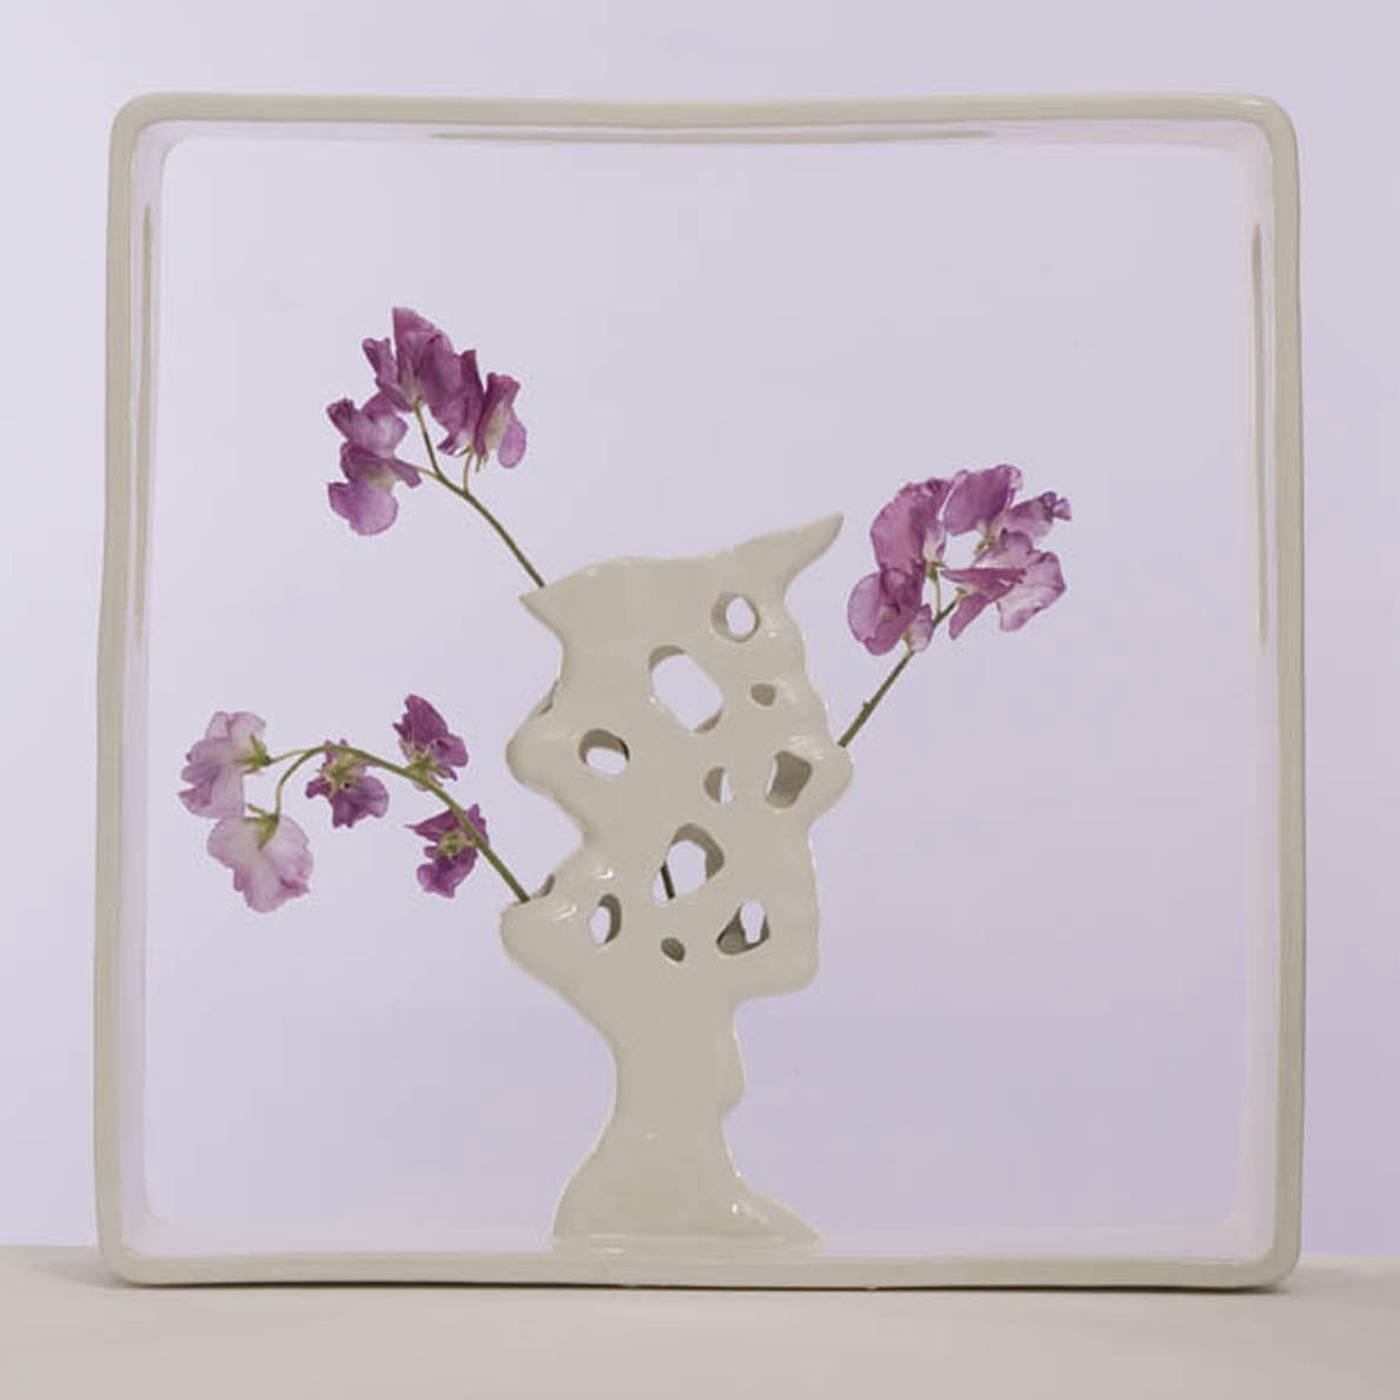 Designed by Andrea Branzi as part of the collection Portali, this vase is one of 18 designs that create micro-architectures enclosed in square spaces to host floral arrangements to be placed anywhere in the house. This is part of a 50-piece series